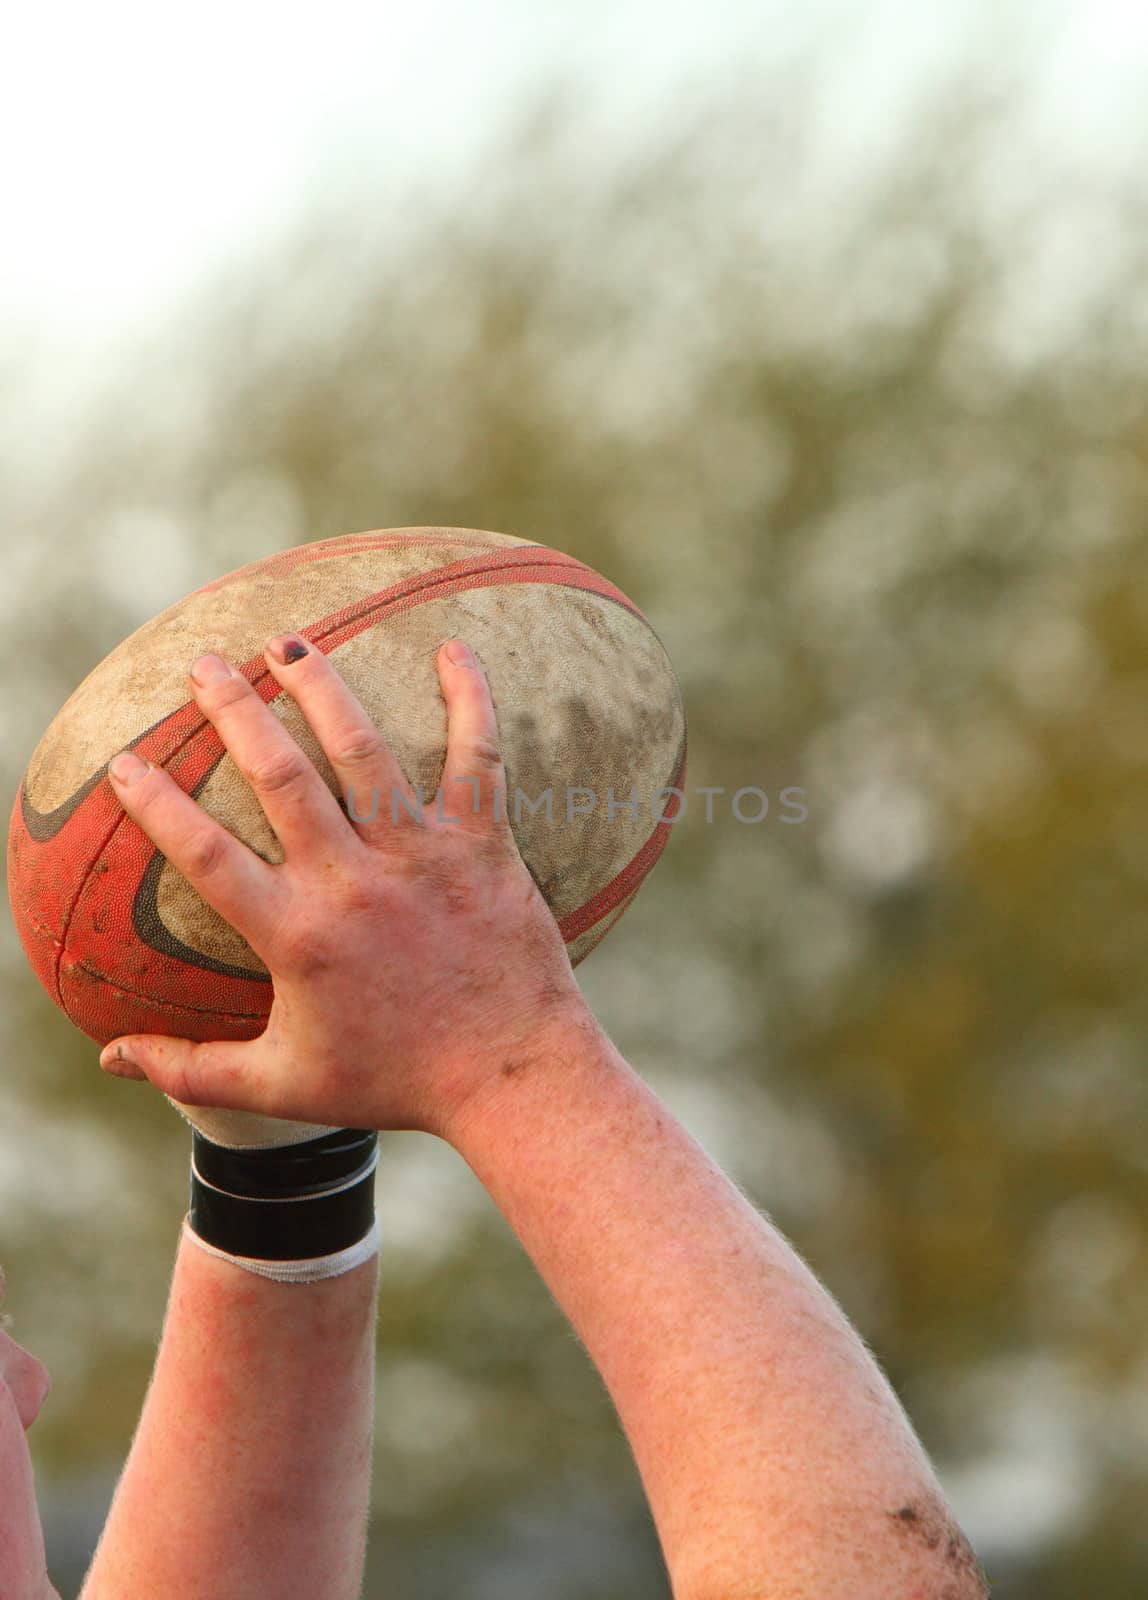 Hands holding a rugby ball